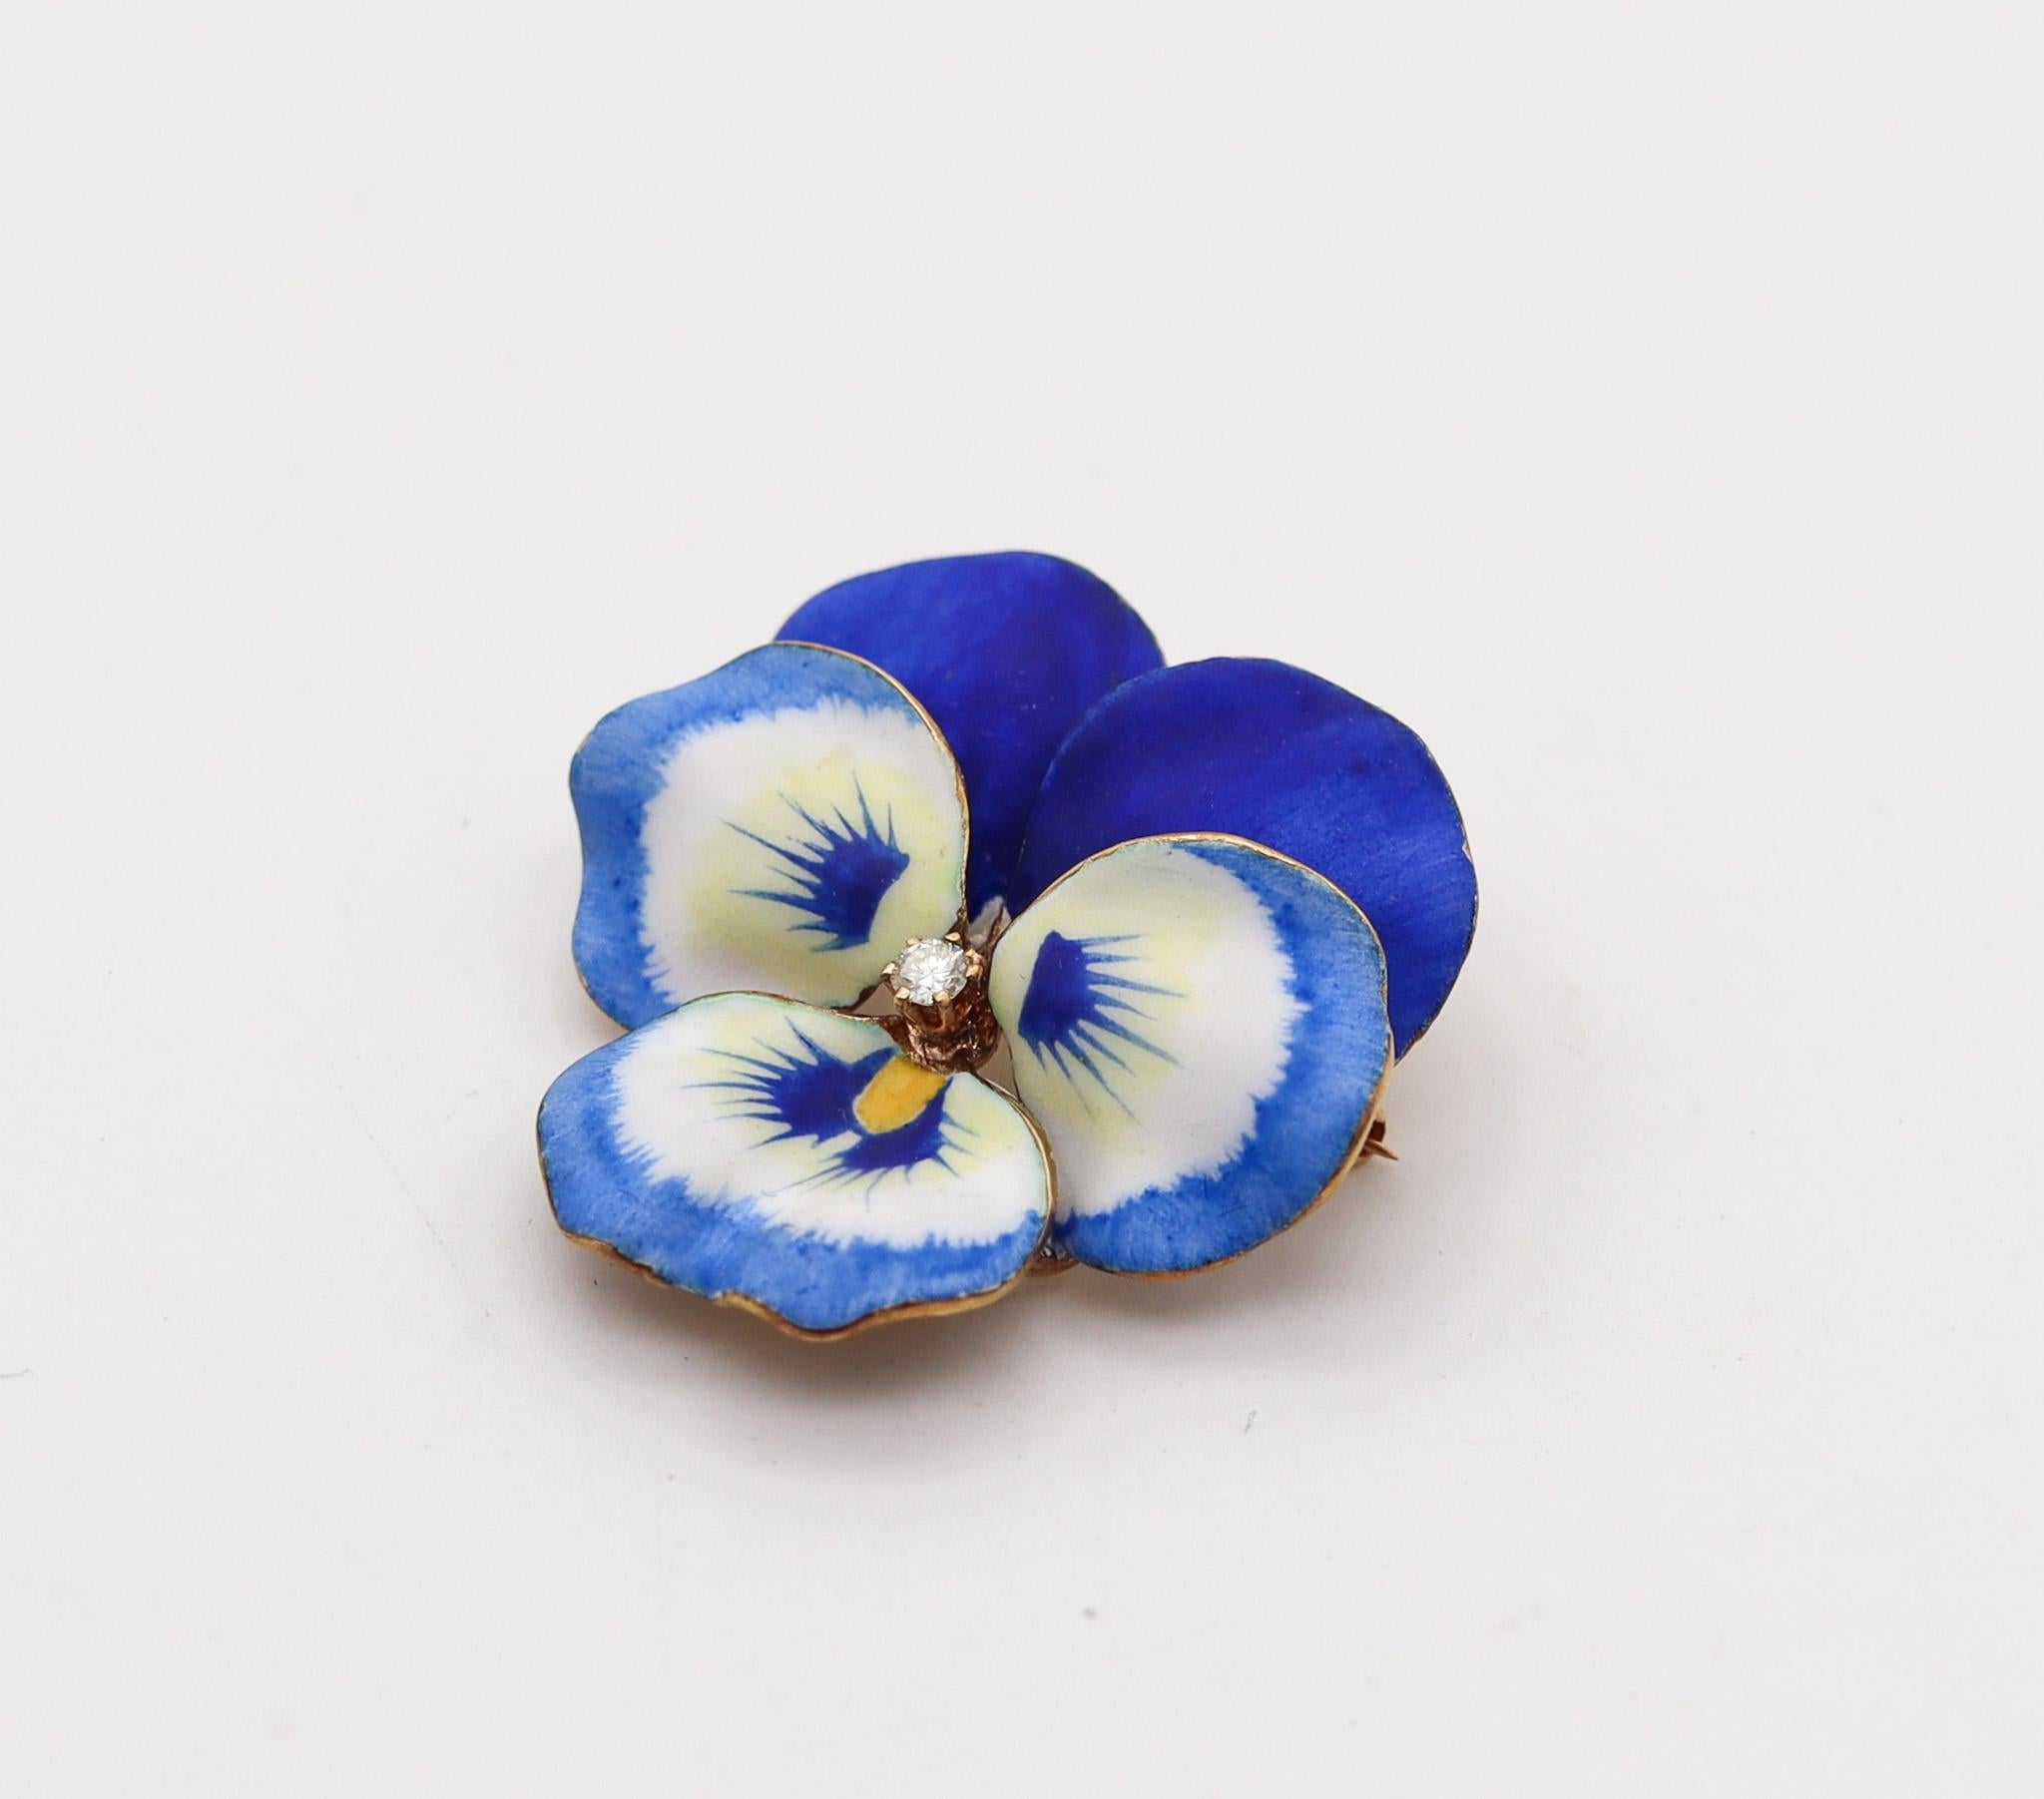 Edwardian enameled convertible flower brooch designed by A. J. Hedges.

Beautiful three-dimensional five-petals pansy flower, created in New Jersey North America during the Edwardian and the Art Nouveau periods, back between the 1900-1910. This